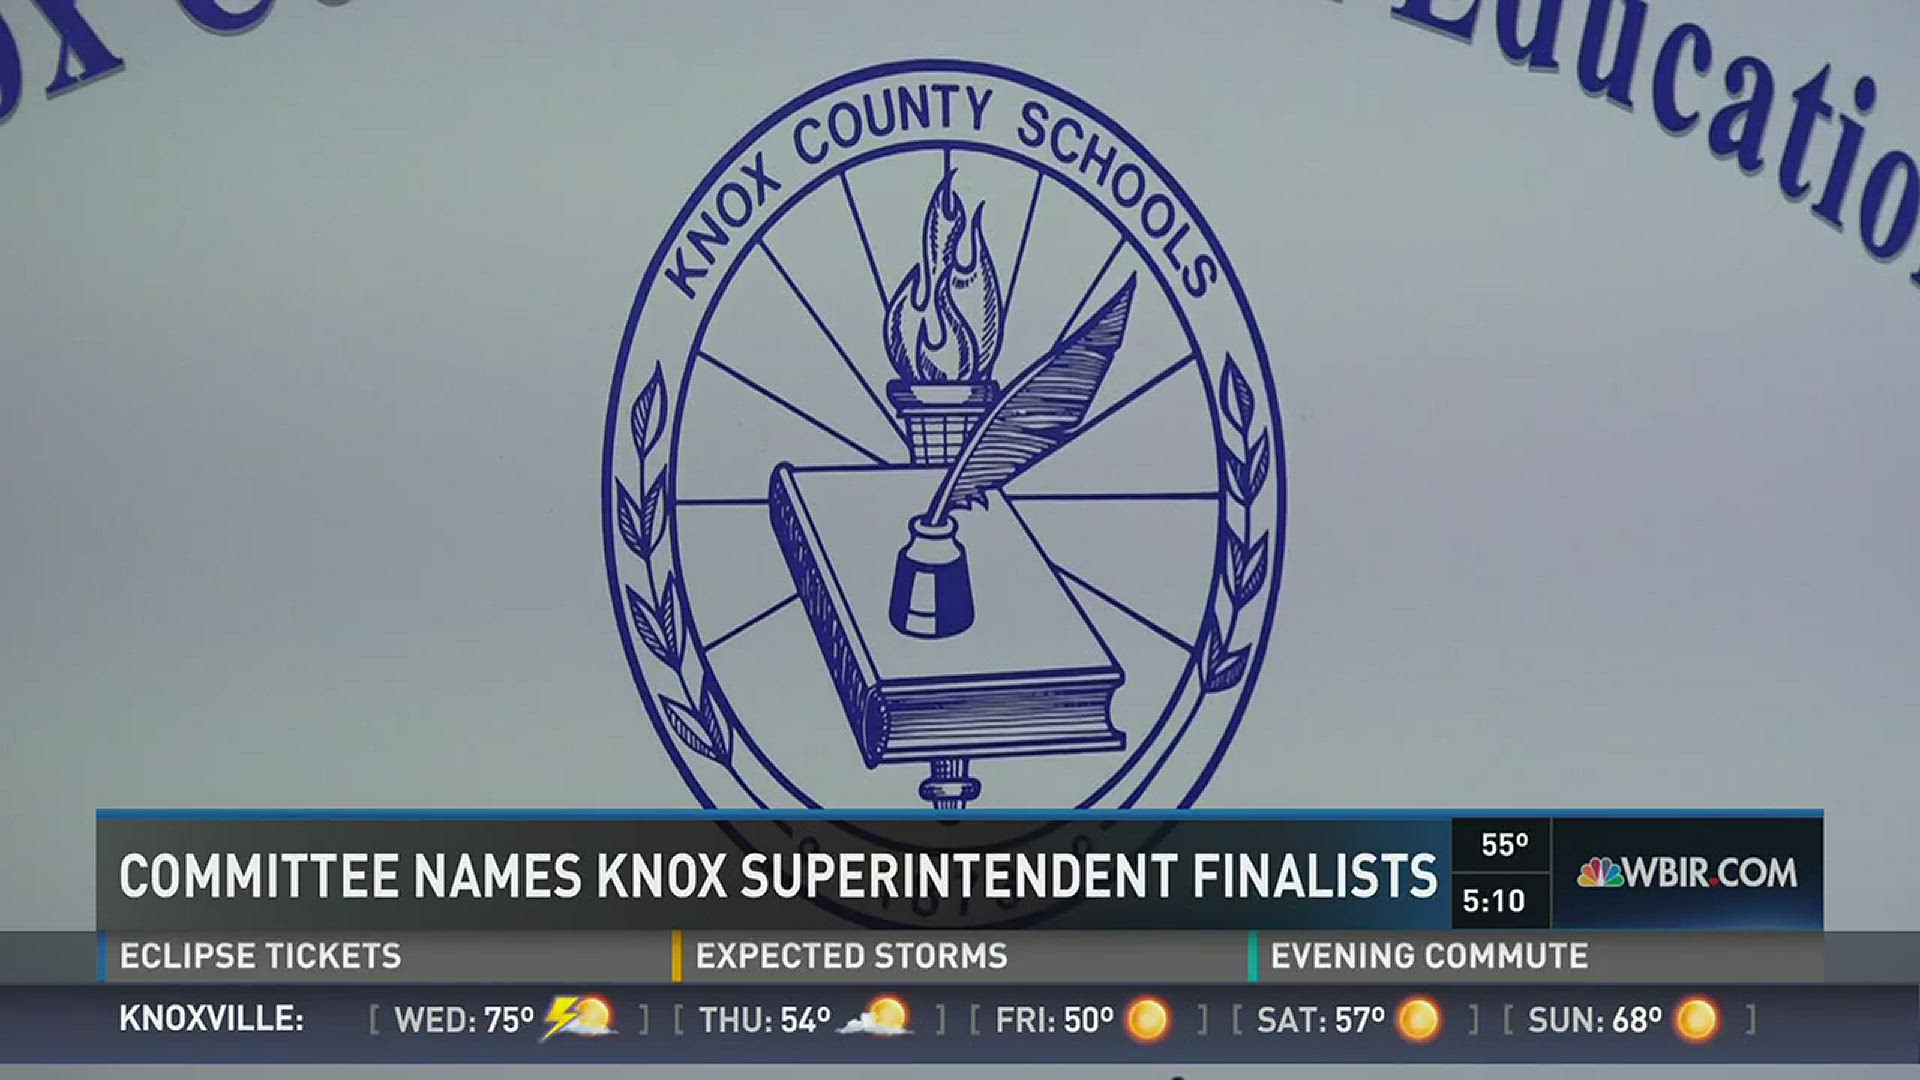 Members of the Knox County Board of Education superintendent search committee named Knox County assistant superintendent Bob Thomas and Hamblen County Schools superintendent Dale Lynch as finalists for the position.